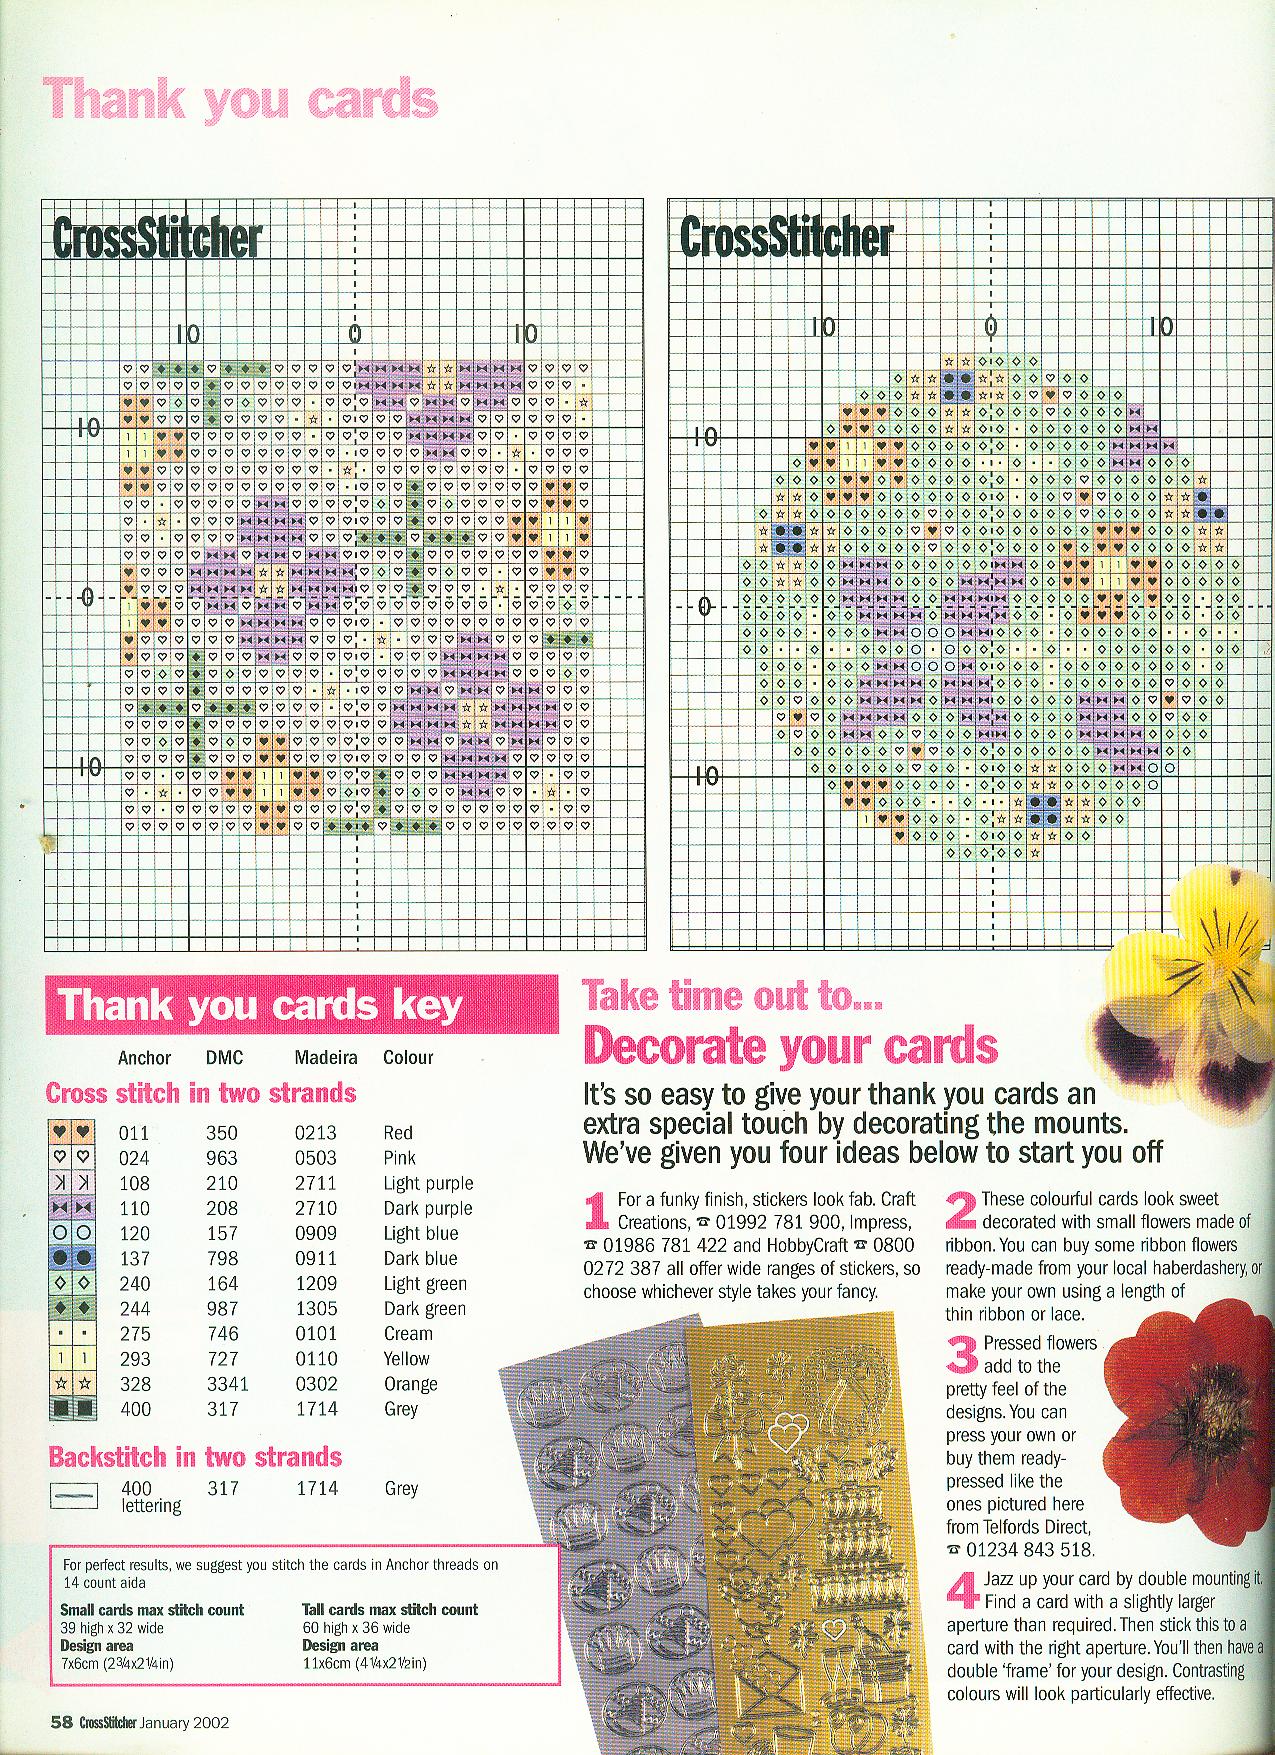 Cross stitch floral cards free patterns (2)